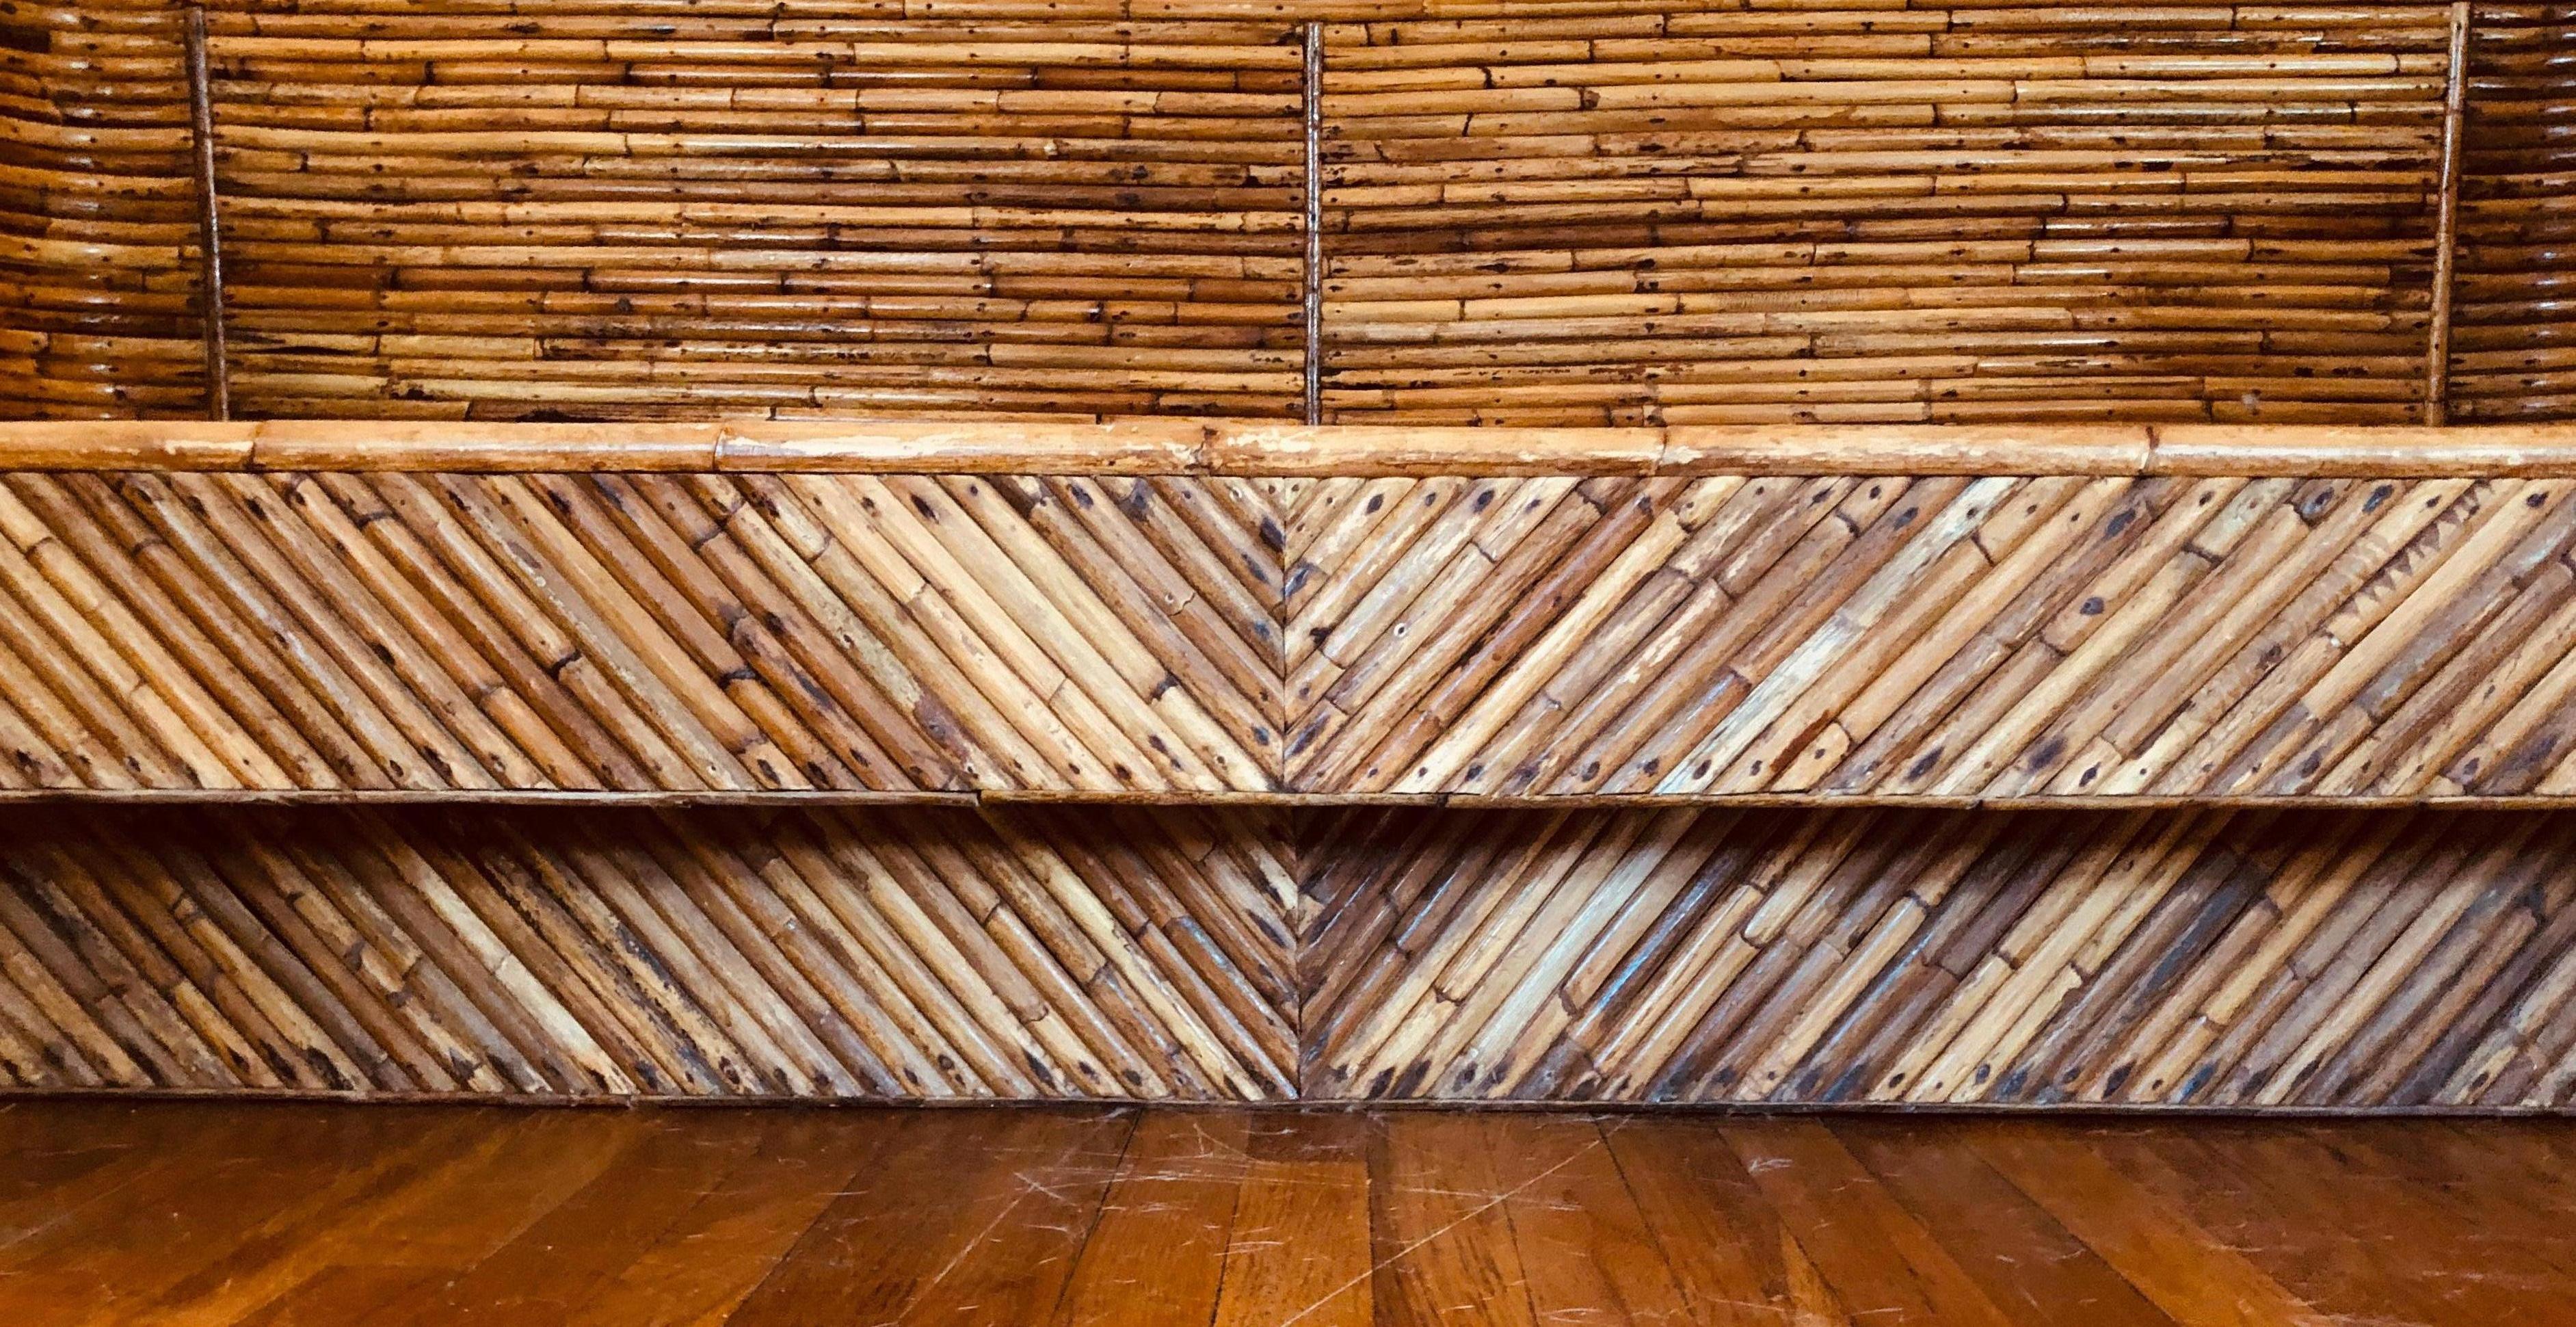 Such a well-constructed solid piece of furniture that shall be here long after we are. Pieces of split-reed bamboo have been artfully mitred & affixed to a club-style sofa. Handmade in the 1970s by native Filipinos and then shipped to the US.